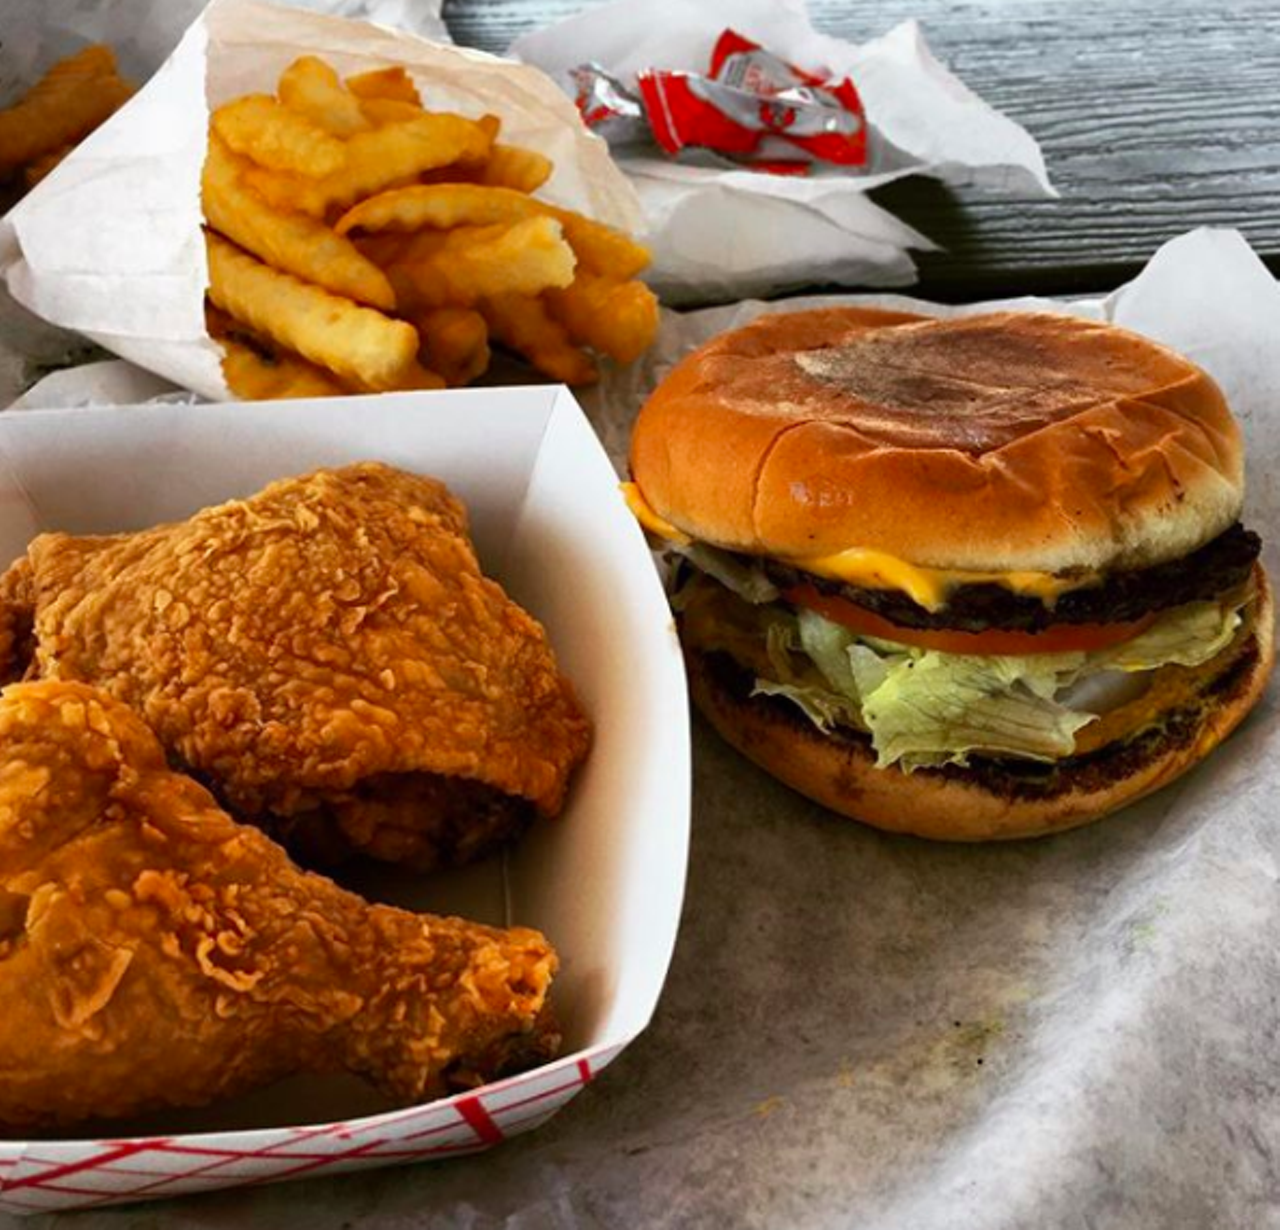 Che’s Chicken & Burgers
4303 S Presa St., (210) 533-7989
Pick up some fish, gizzards, burgers and – duh – chicken at this counter-serve fast food spot. Sit under the covered patio and enjoy the fried goodness. You can worry about the calories later.
Photo via Instagram / davistho_sa